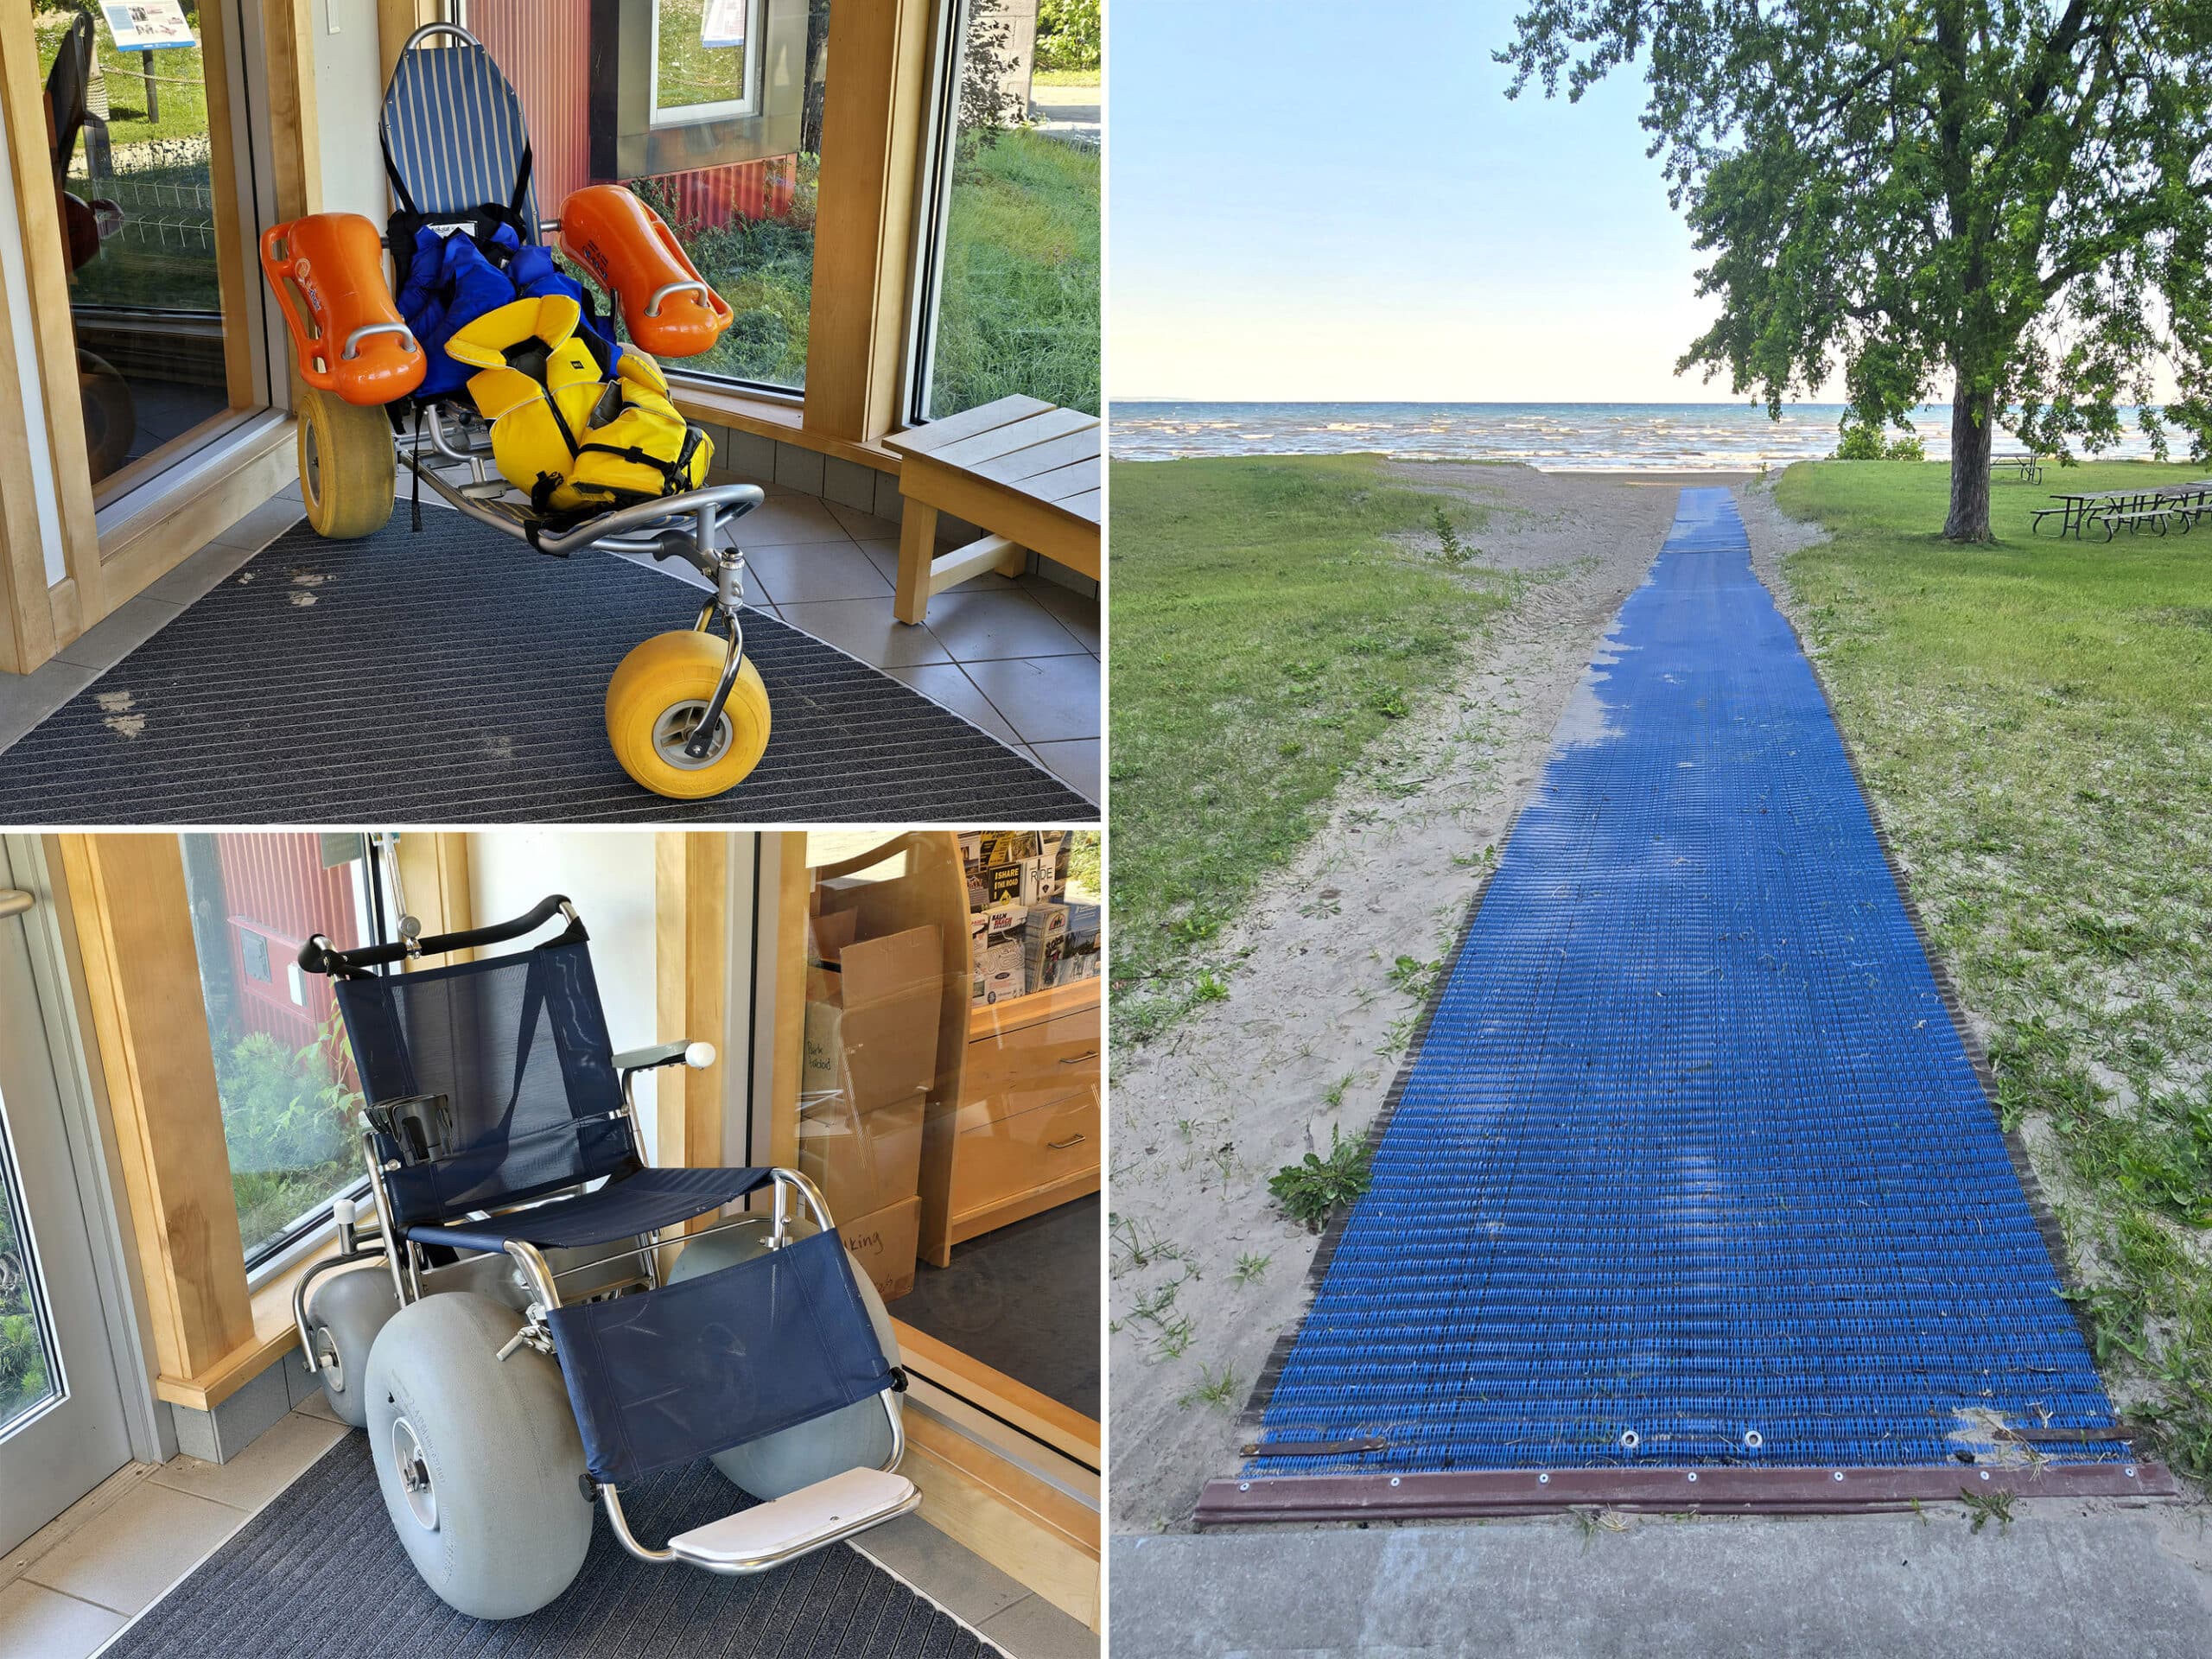 3 part image showing 2 different all terrain wheelchairs and a blue mobi mat extending onto wasaga beach.